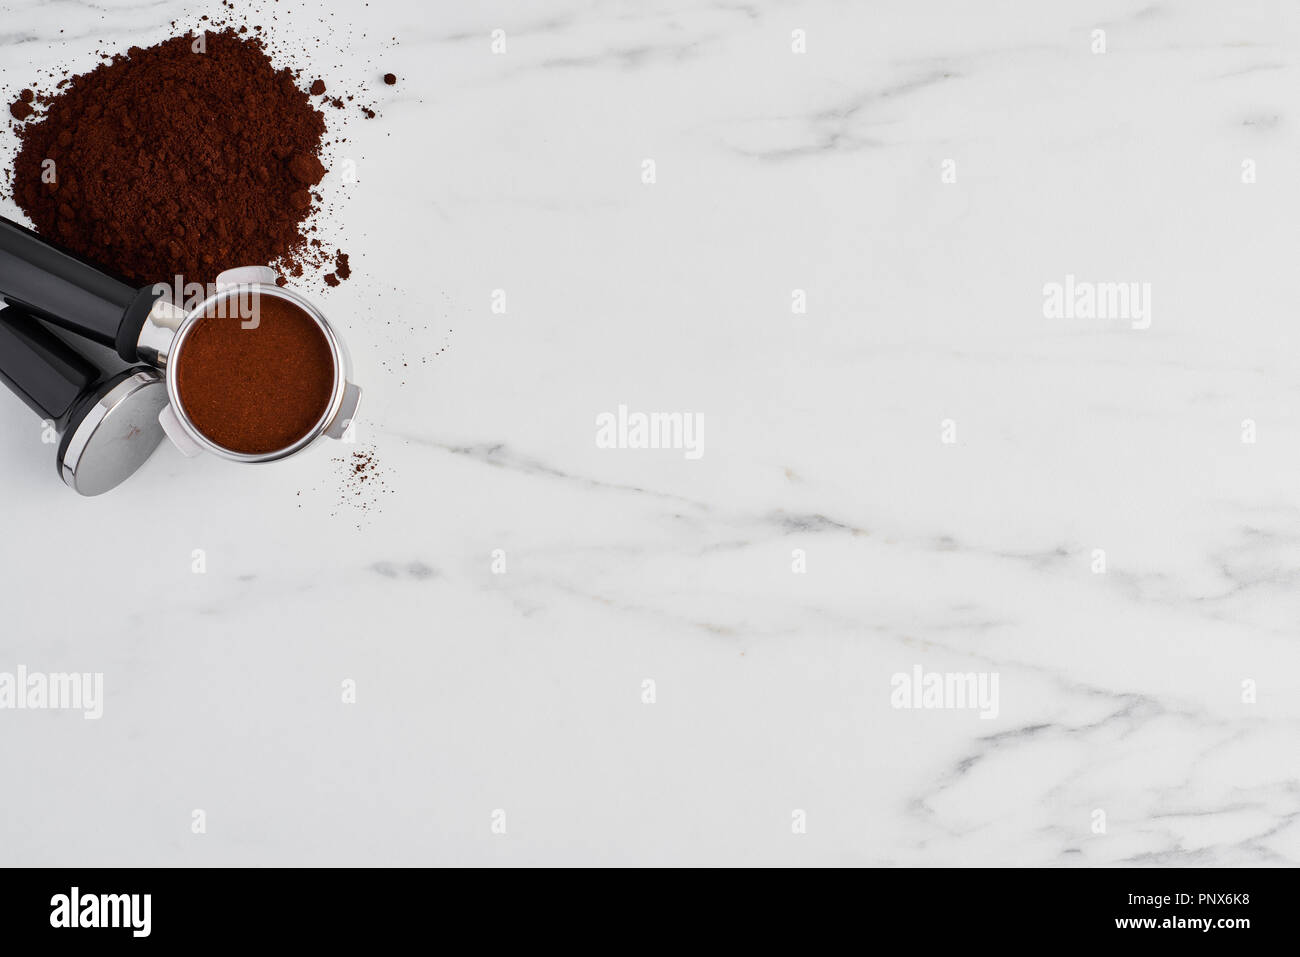 Top view of black coffee tamper and portafilter with ground coffee on white marble background. Flat lay with copy space. Stock Photo